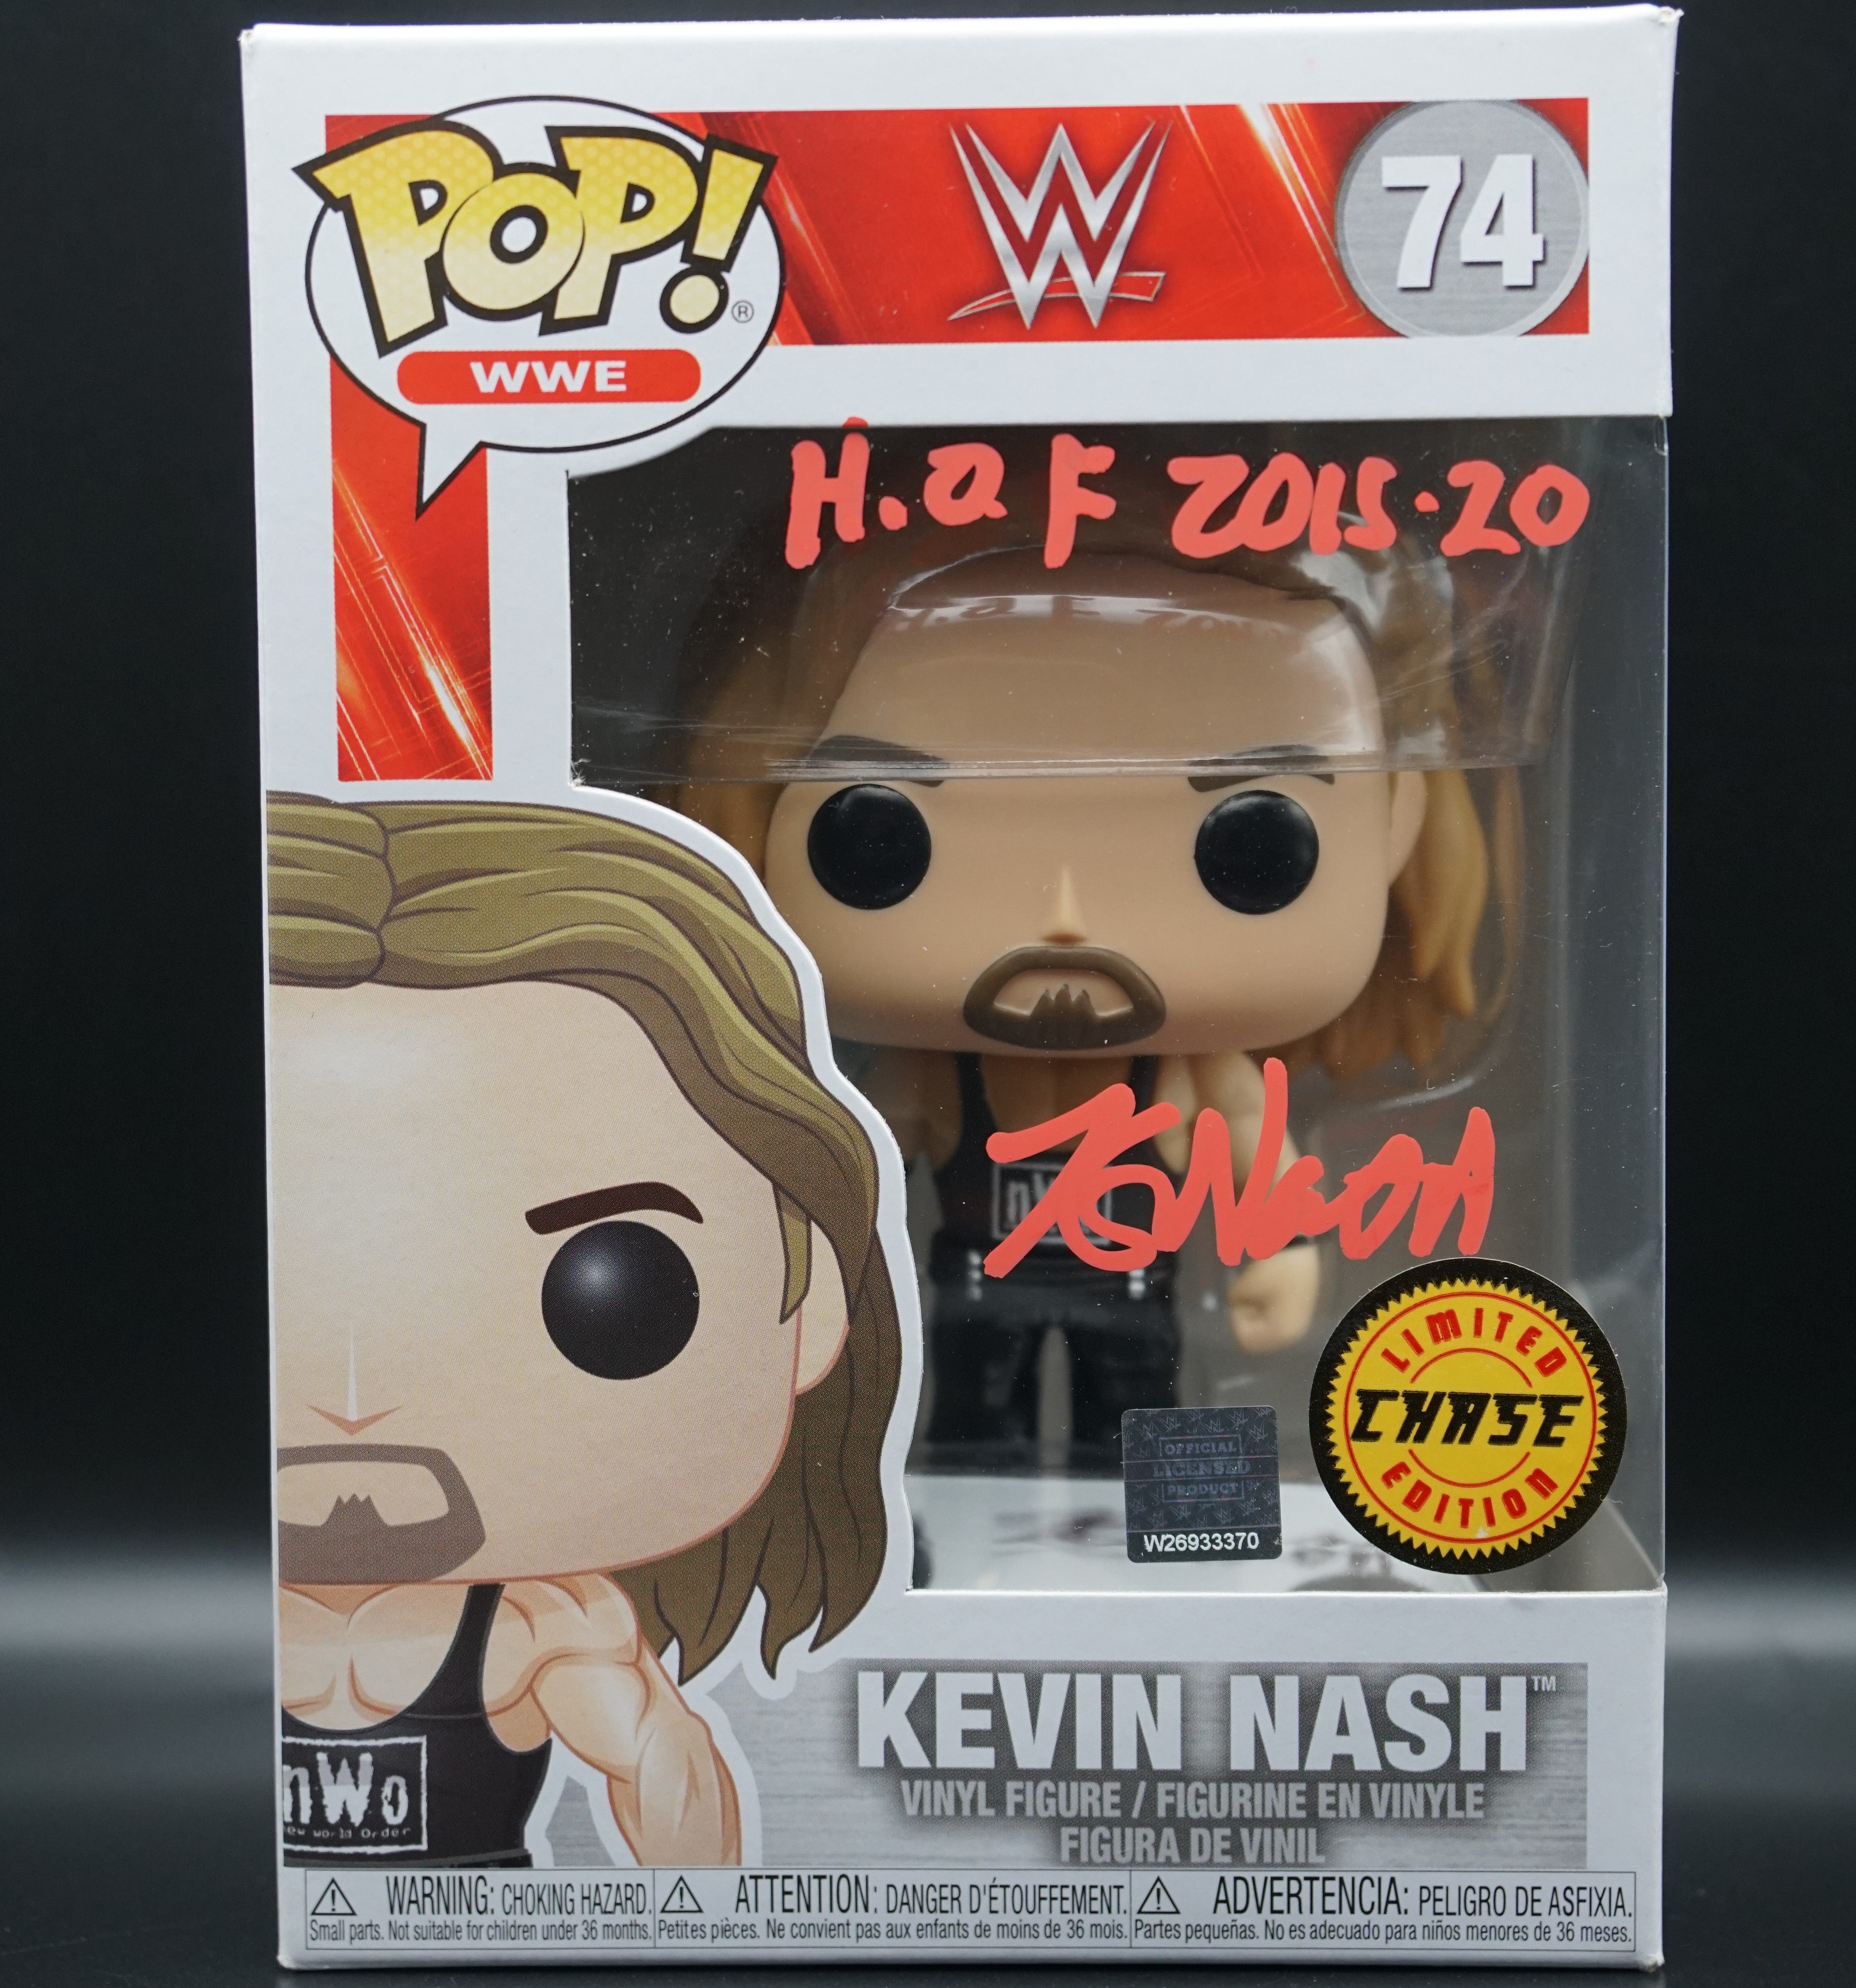 WWE Kevin Nash Pop #74 Chase Edition with Inscription "H.O.F 2015-20" PSA COA - Signed by Kevin Nash